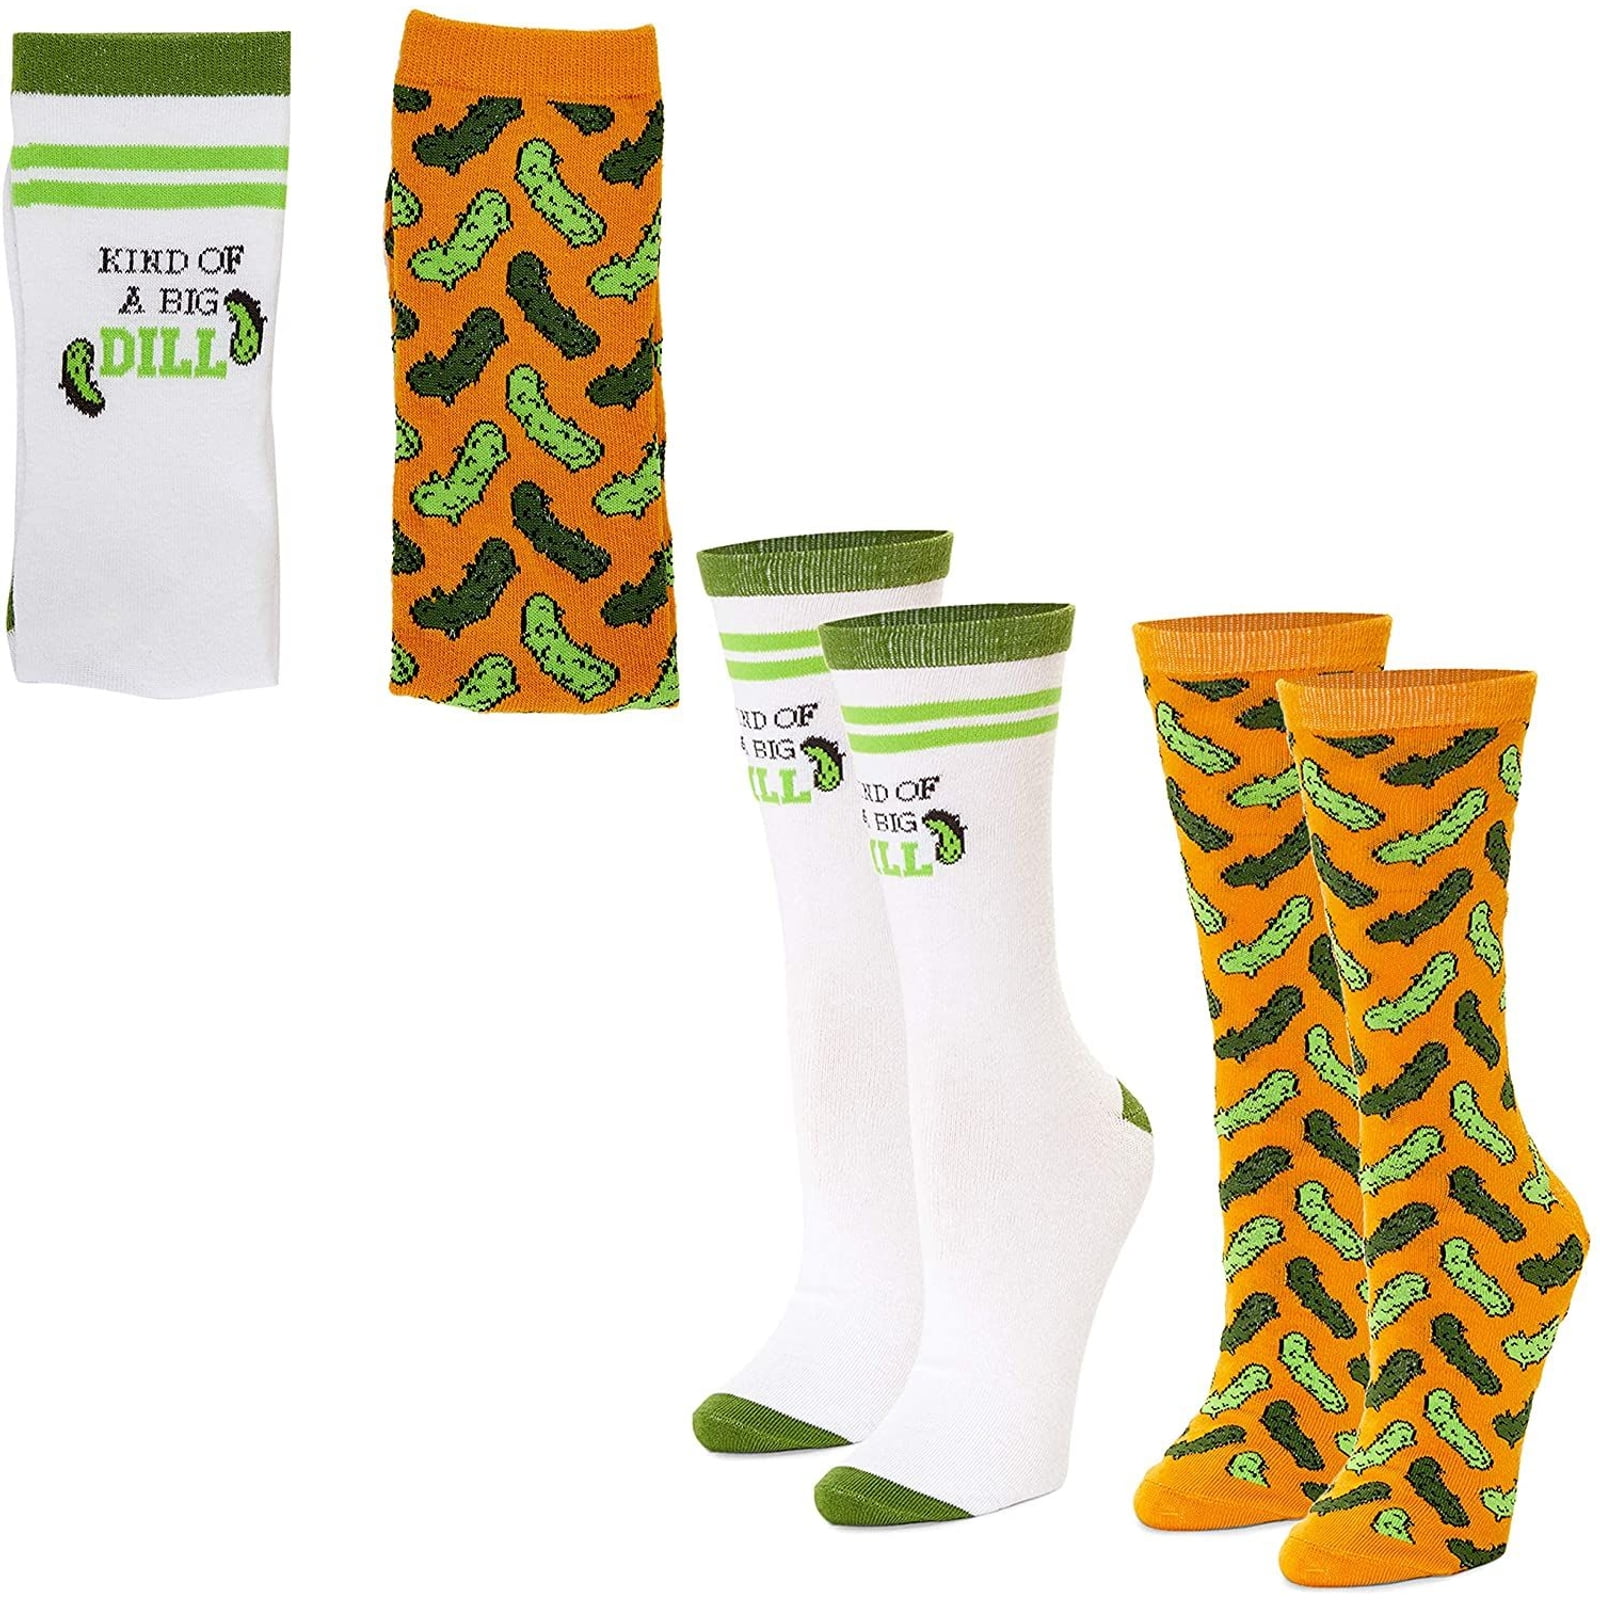 Funny Pineapple Teeth Pickle Avocado Gifts Zmart Pineapple Teeth Pickle Avocado Ankle Low Cut Socks 2 Pack